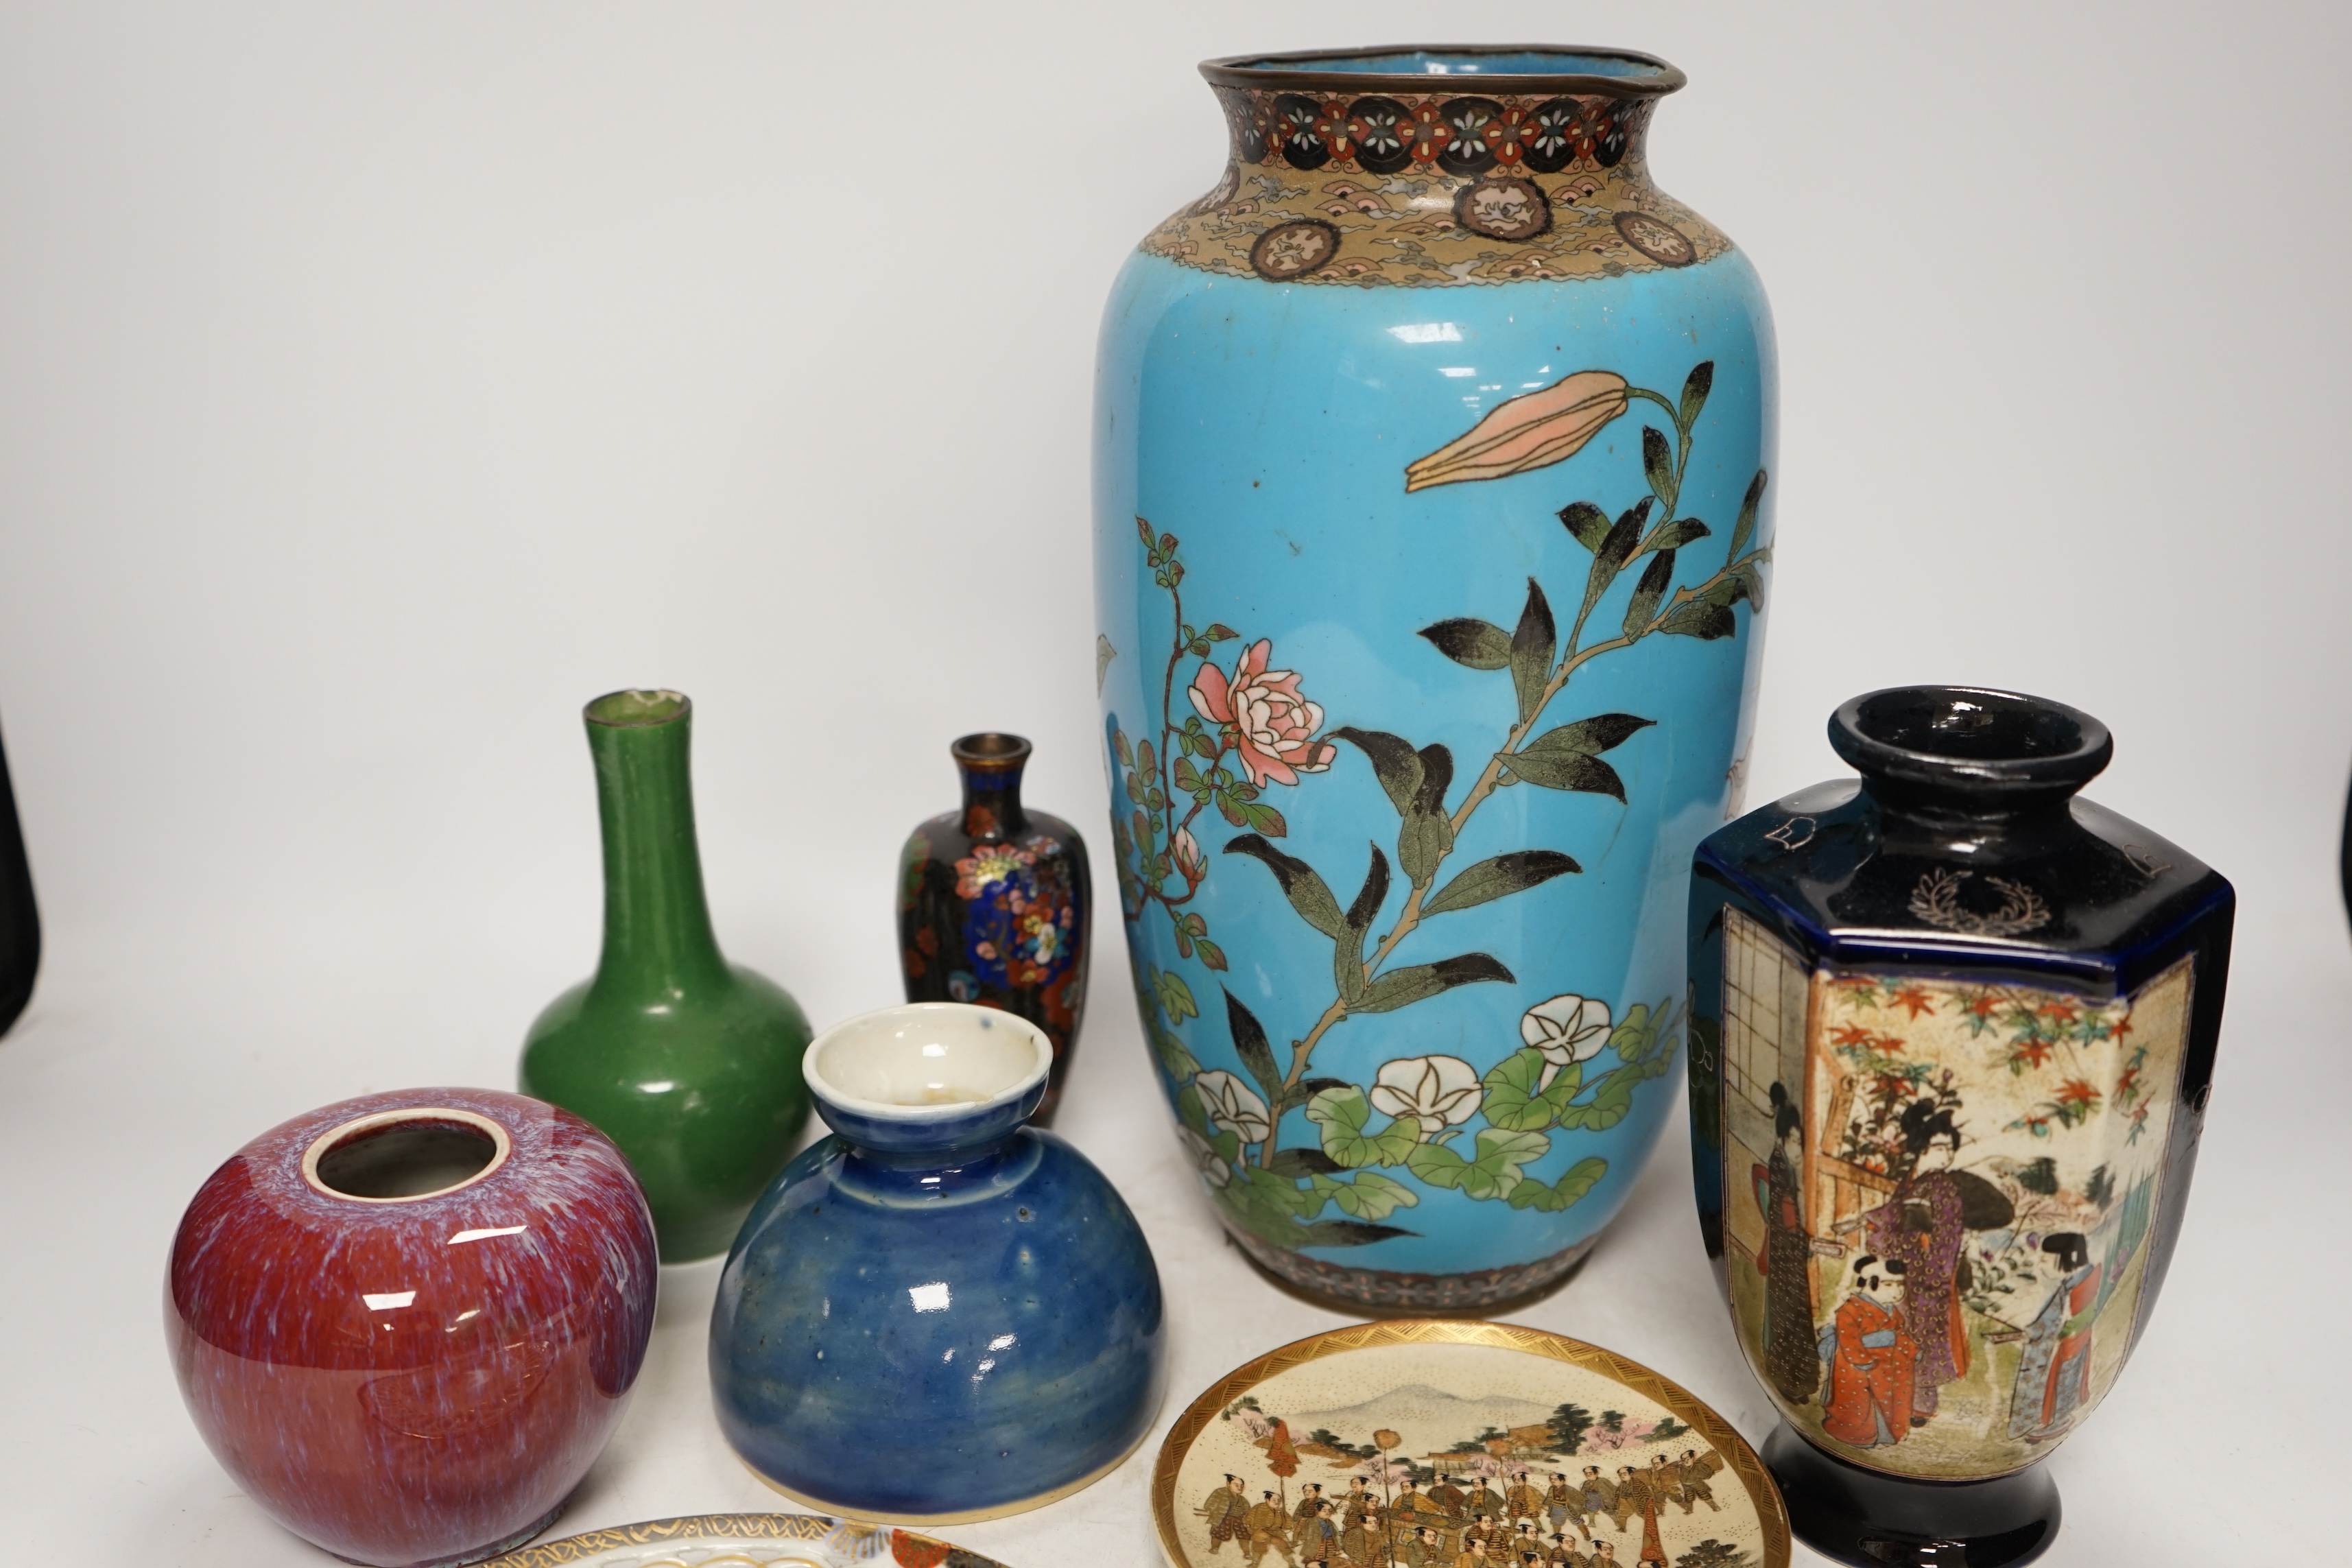 Assorted Japanese items, Satsuma, cloisonné, etc., tallest item 31cm high. Condition - most chipped, dented or cracked